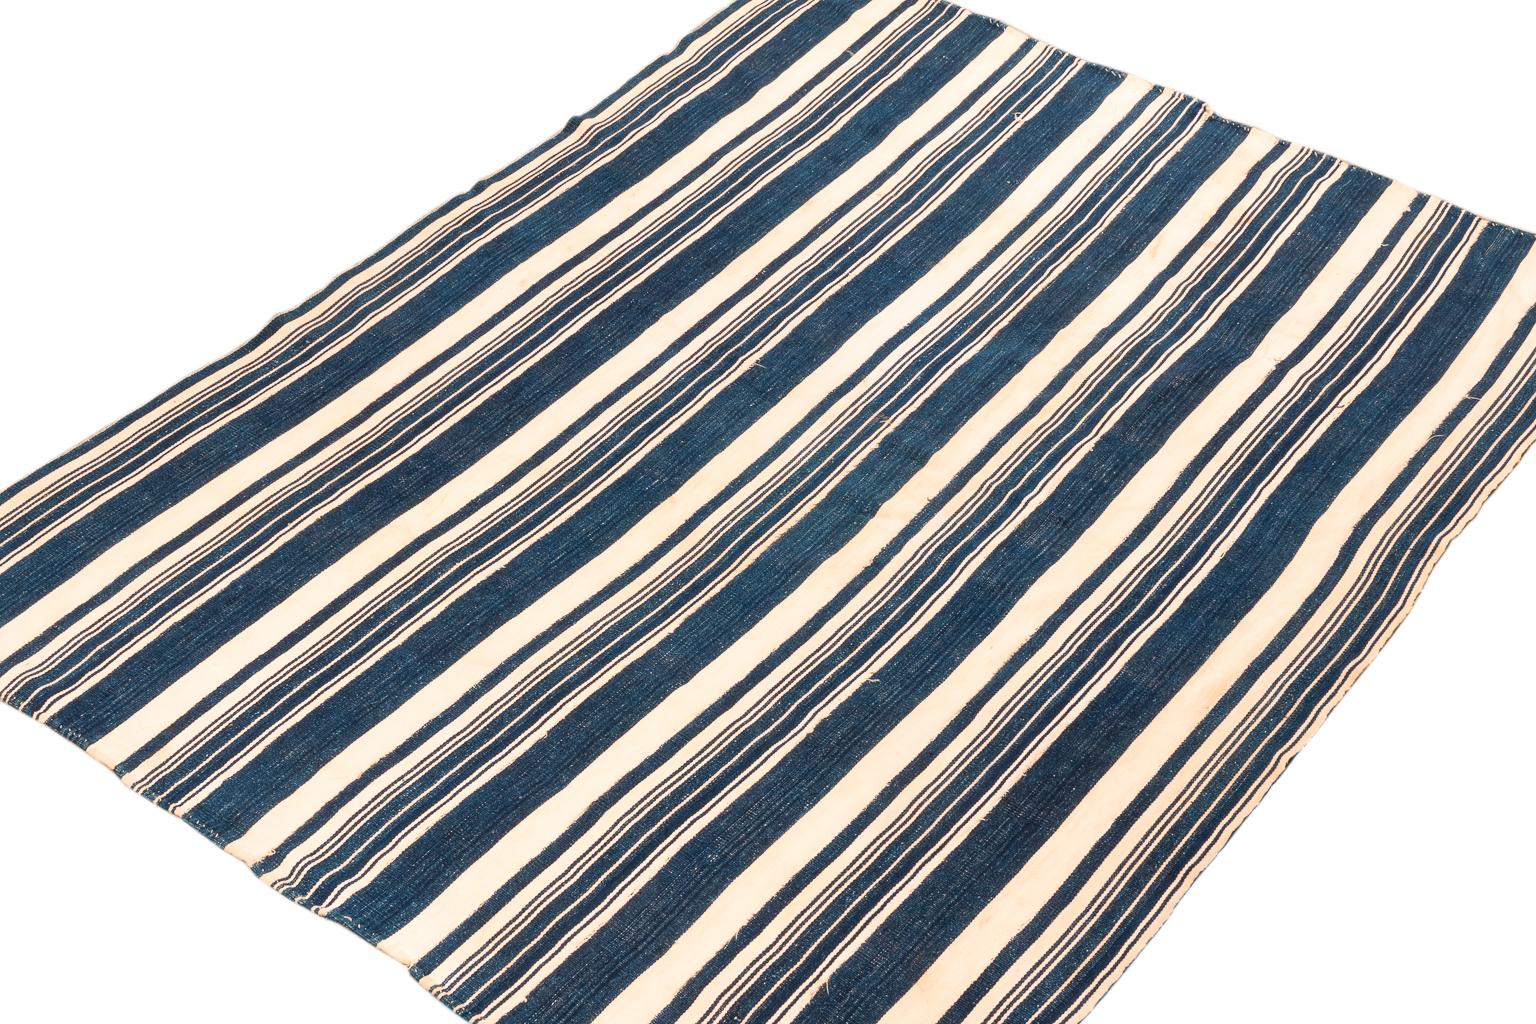 There is nothing like real indigo derived naturally from the Indigo fera species of plant. The color is mesmerizing because of its richness. Hand dyed on hand-spun cotton this blue and white stripe wrap is a great example of these tribal weavings.